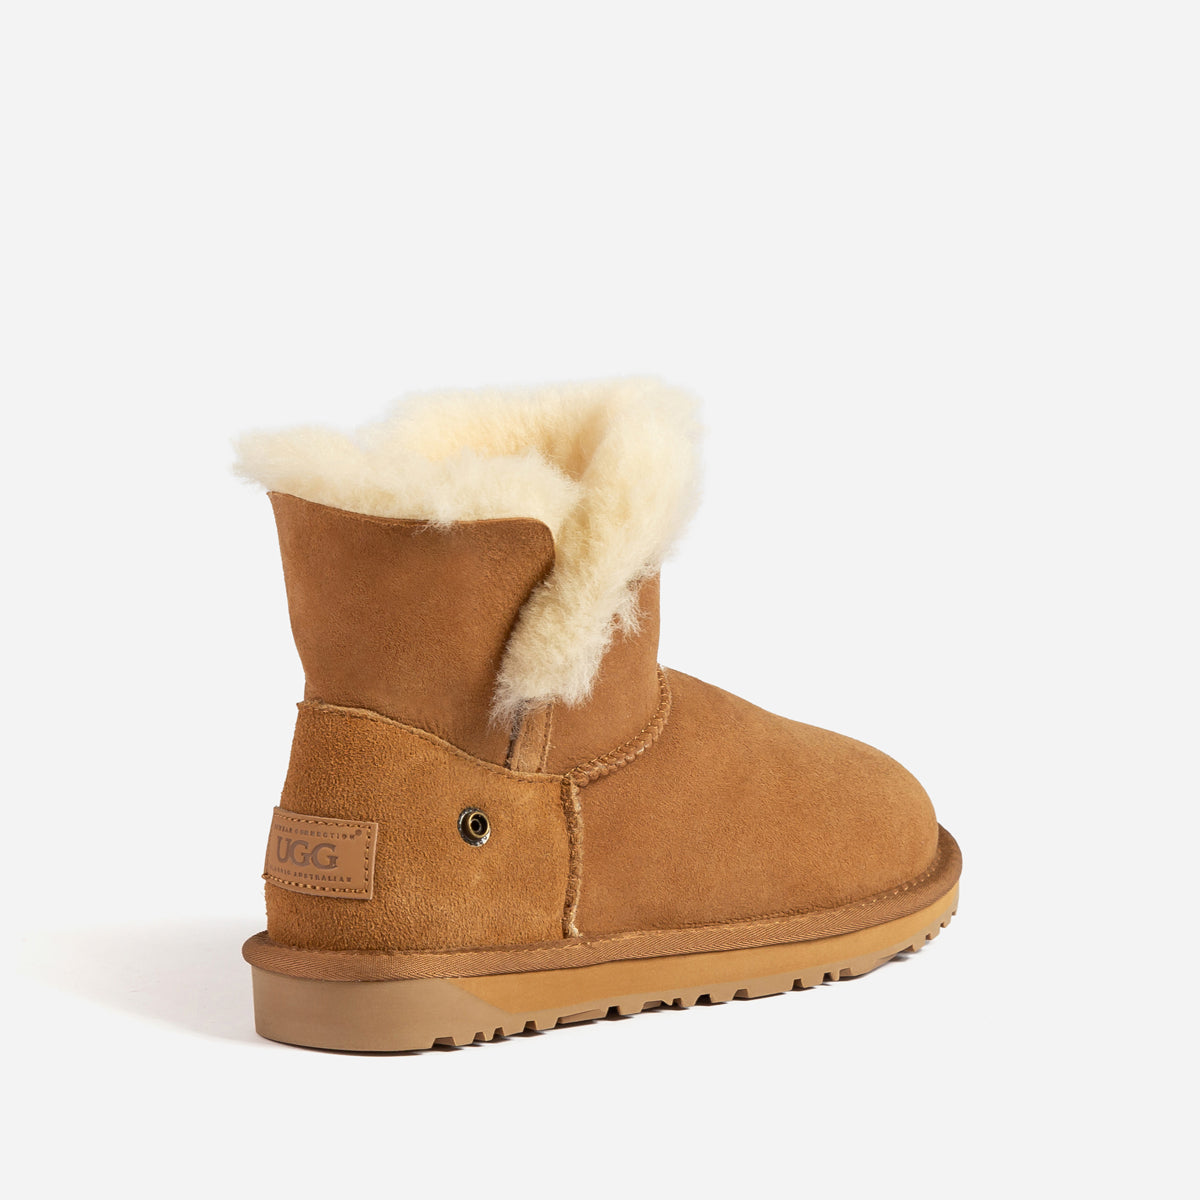 Ugg Mini Boots (Water Resistant)